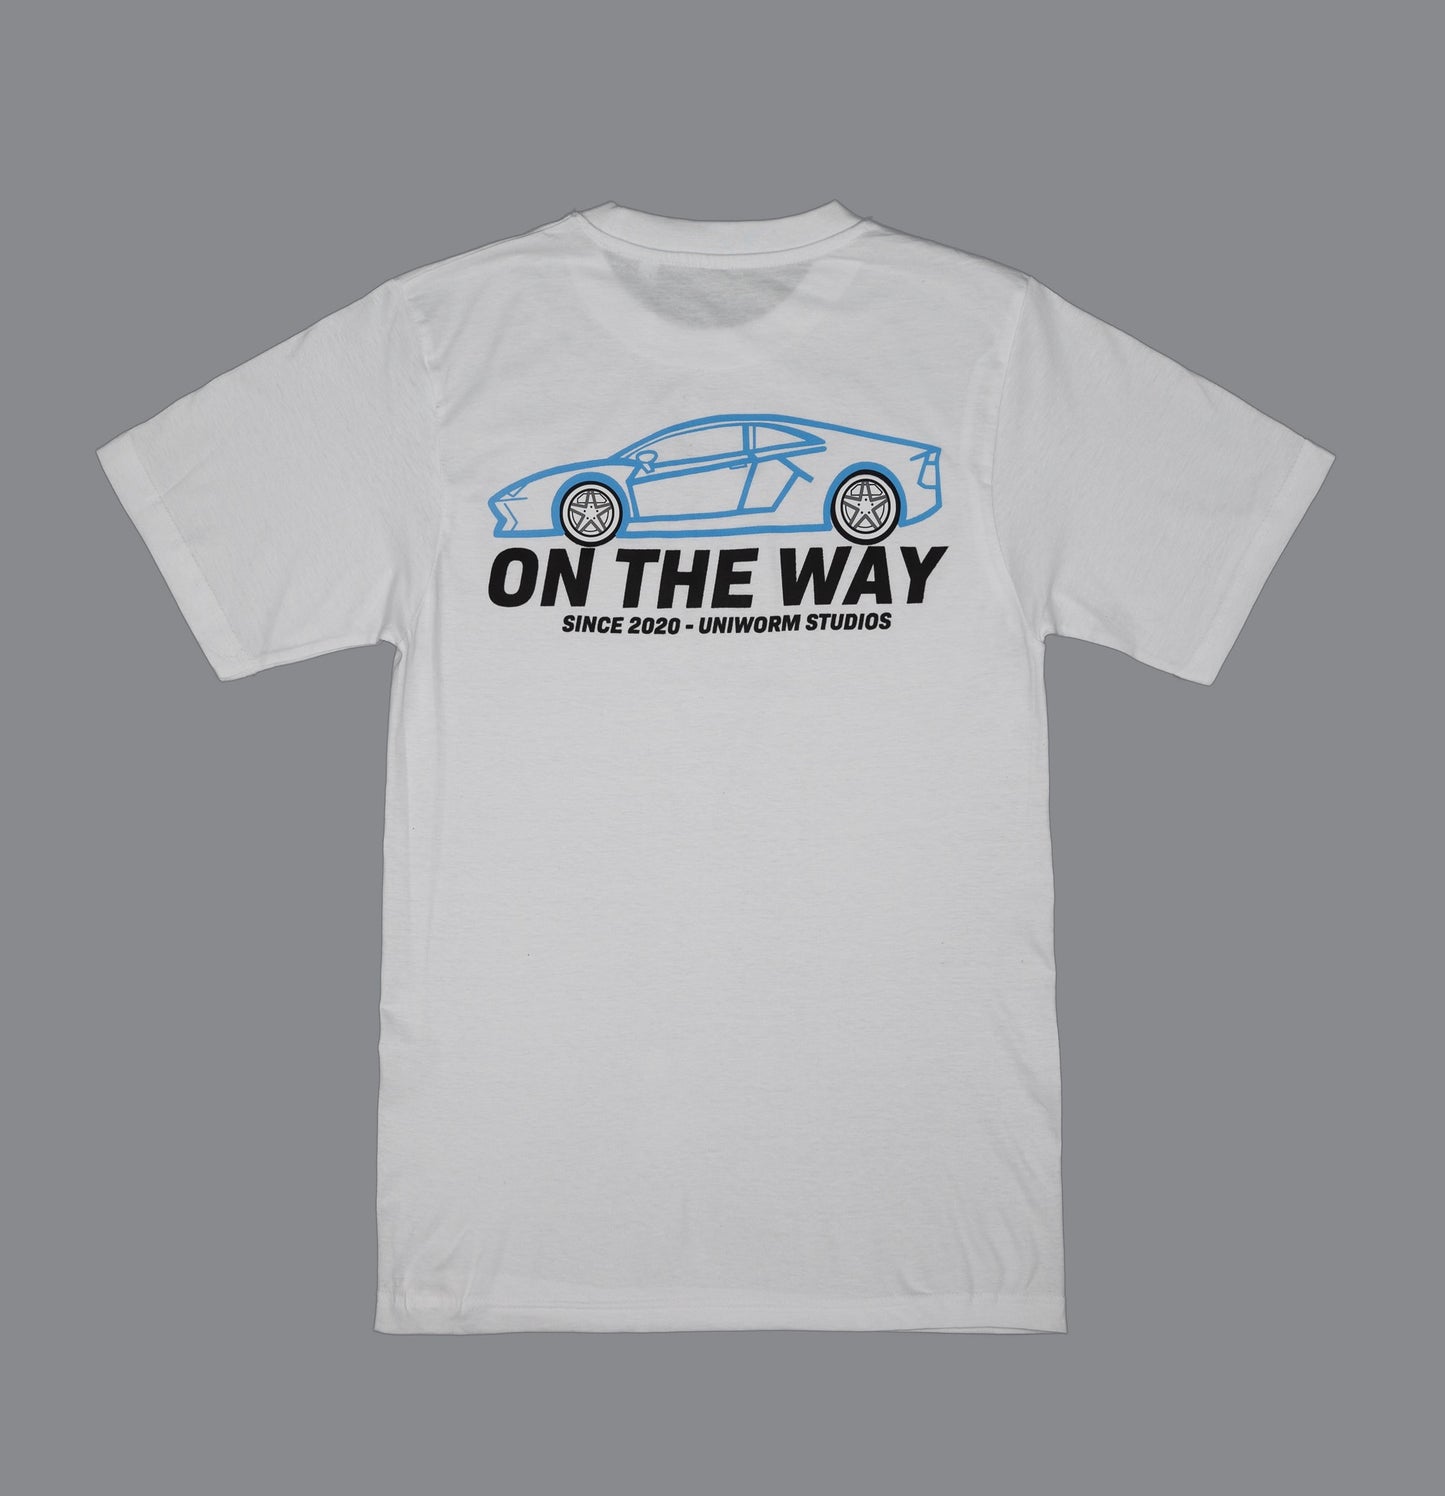 ON THE WAY T-SHIRT